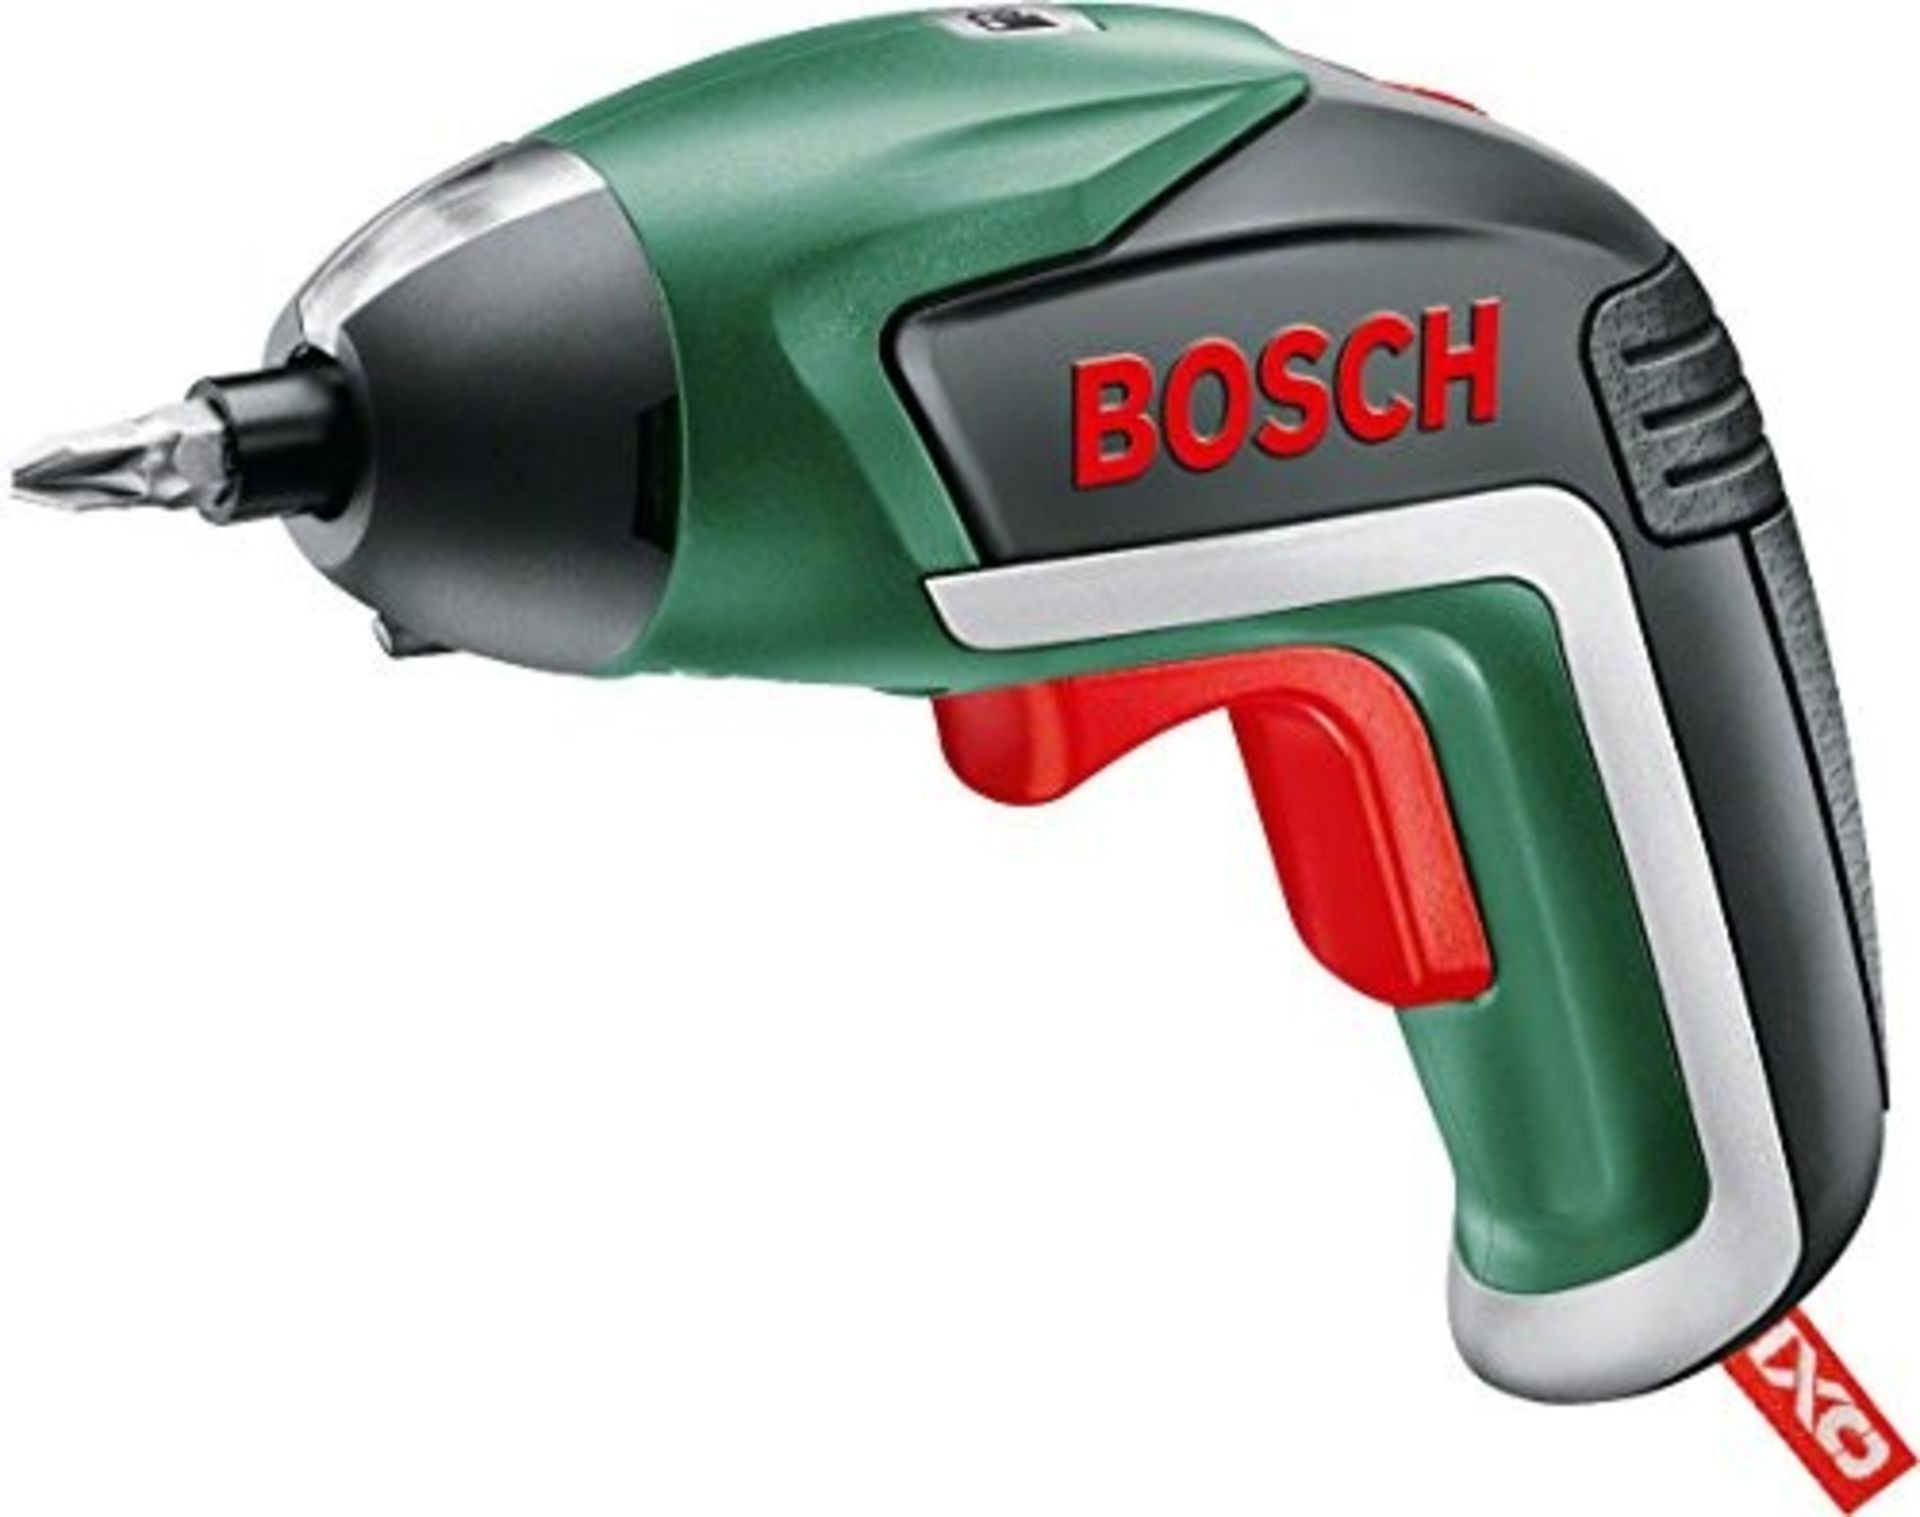 Bosch IXO Cordless Screwdriver with Integrated 3